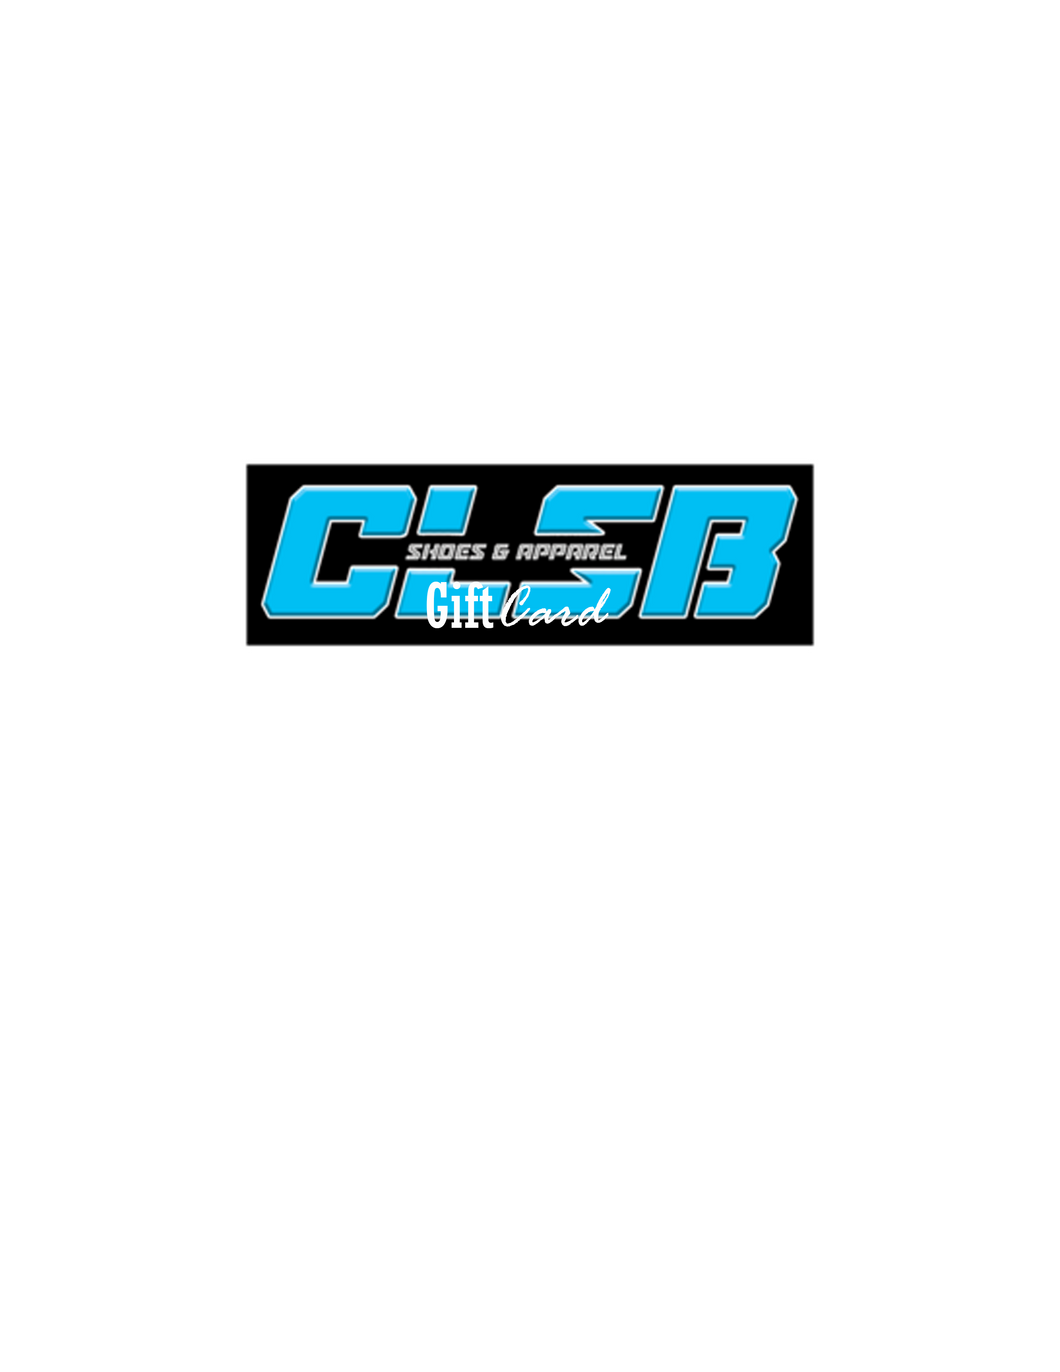 CLSB Gift Cards